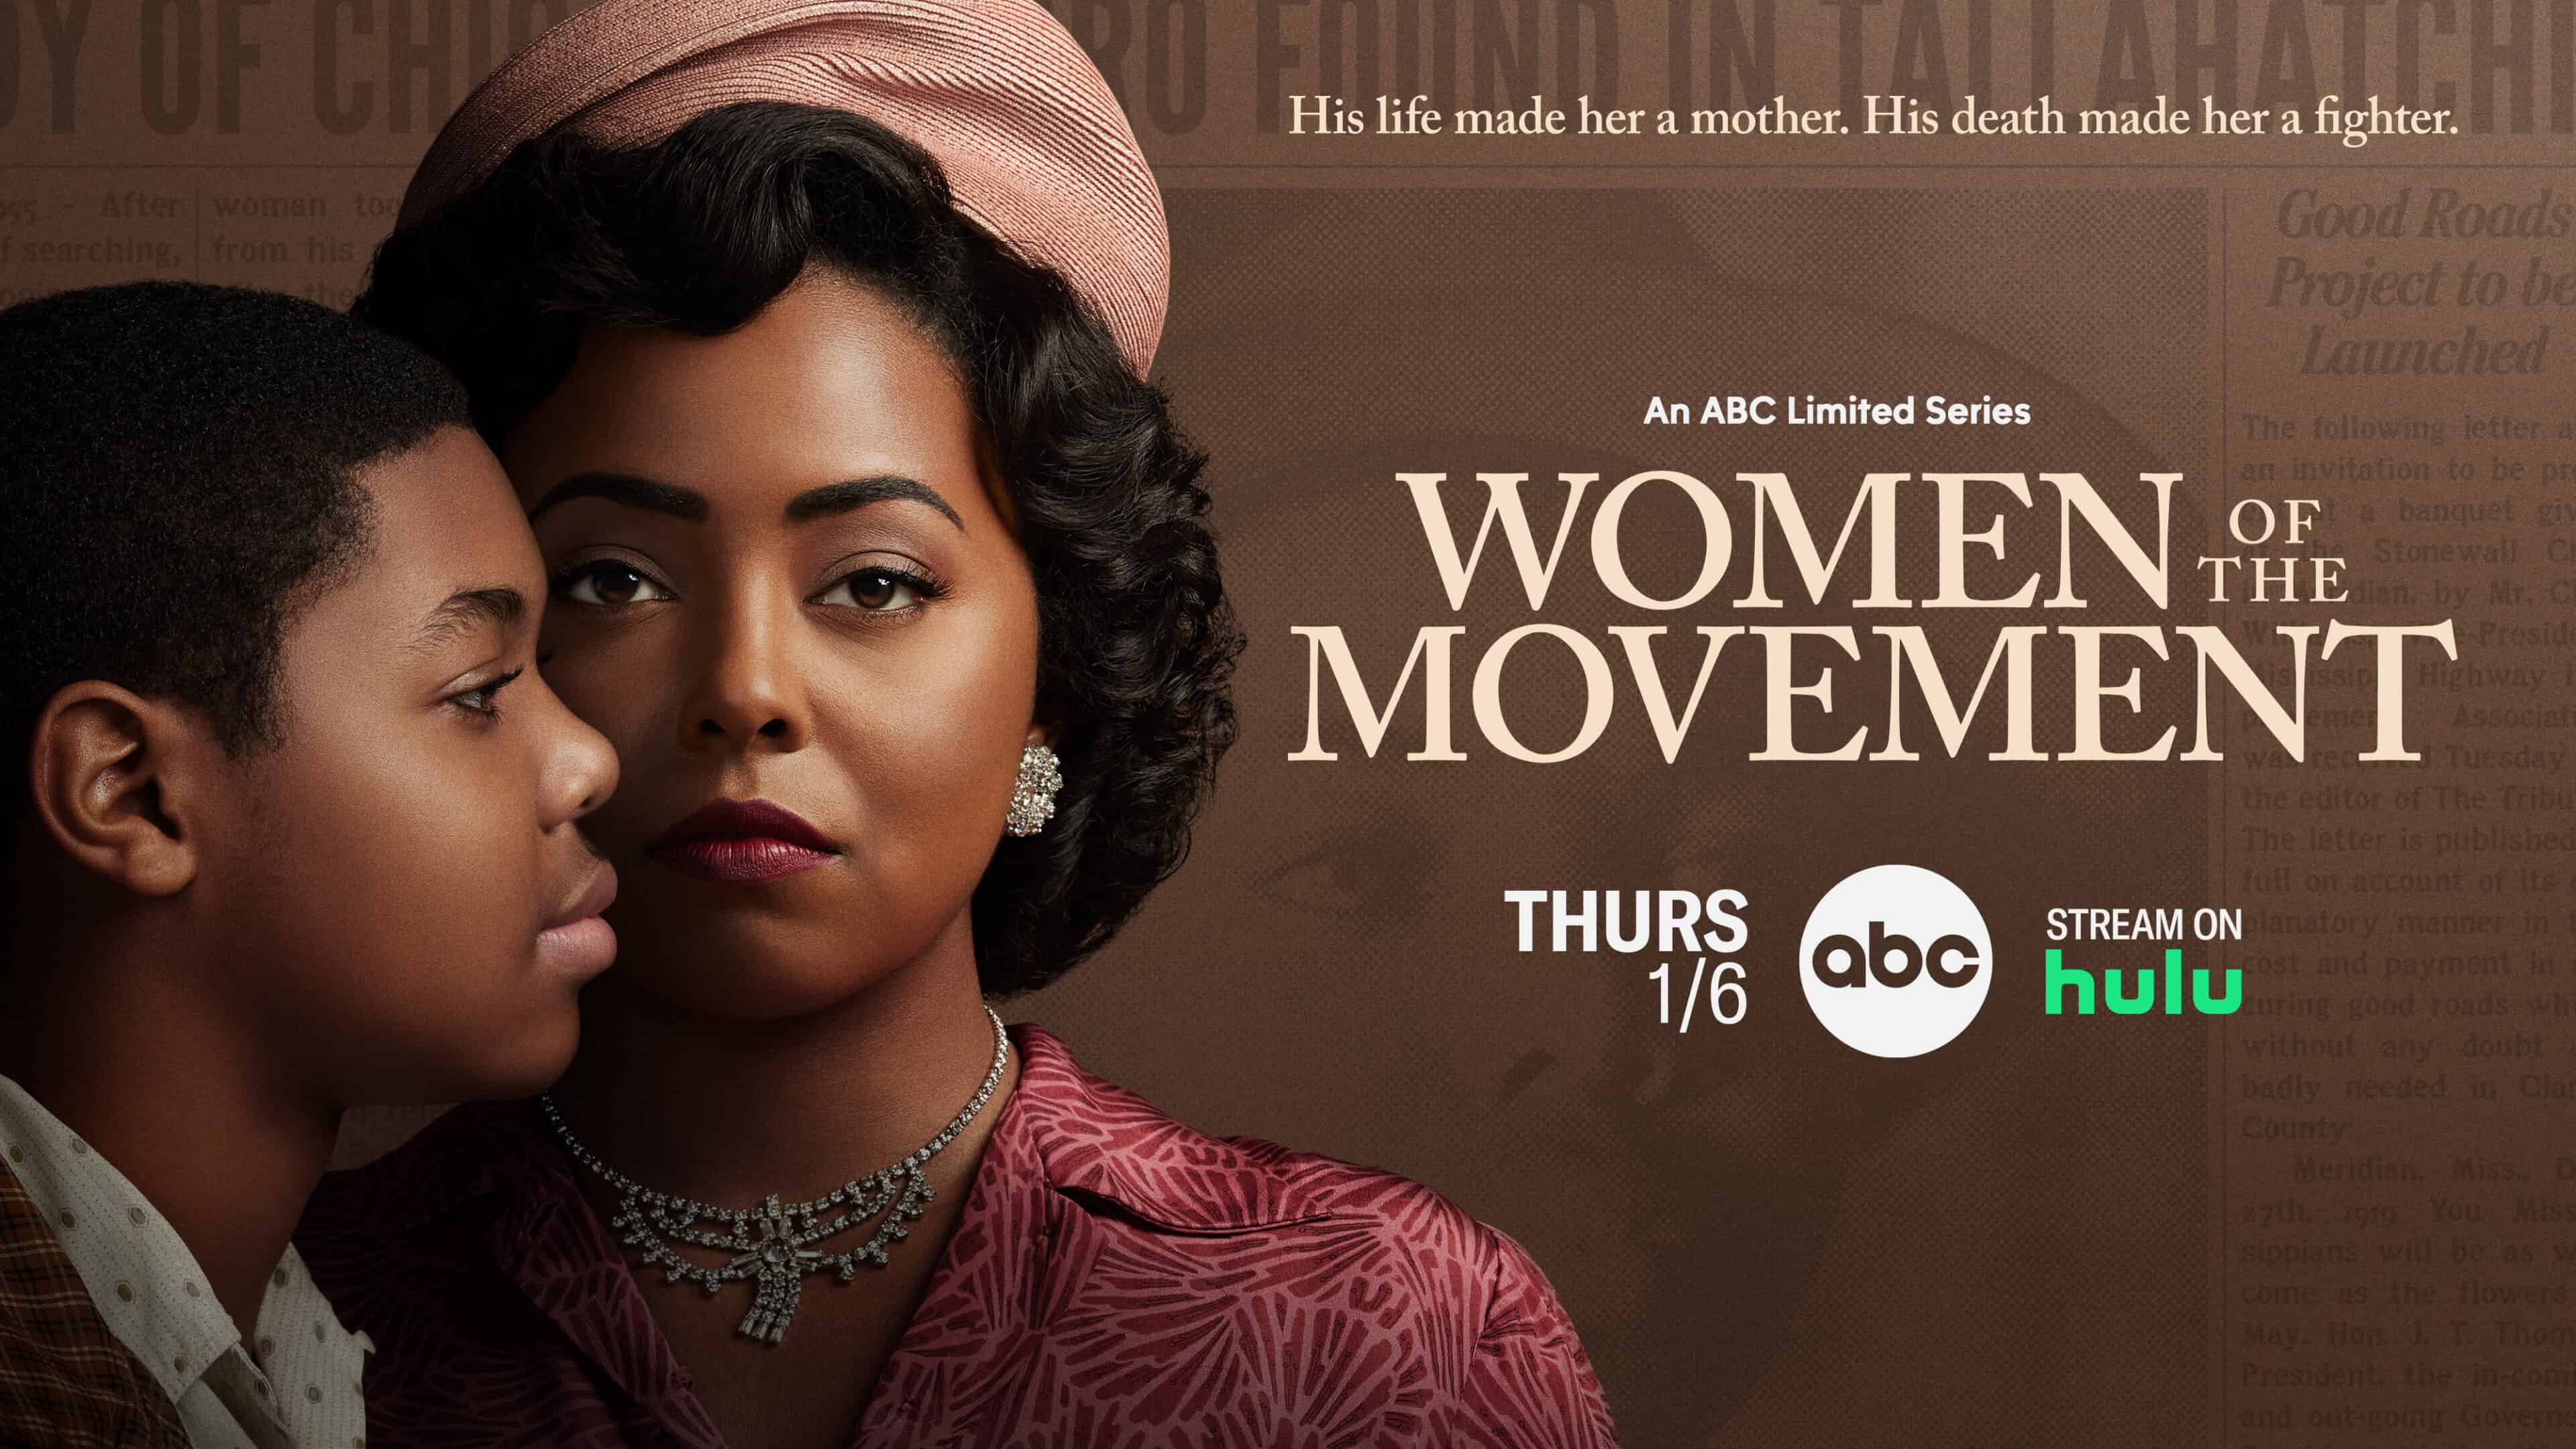 Marketing Poster - Women of the Movement Season 1 Episode 1 and Episode 2 [Series Premiere]